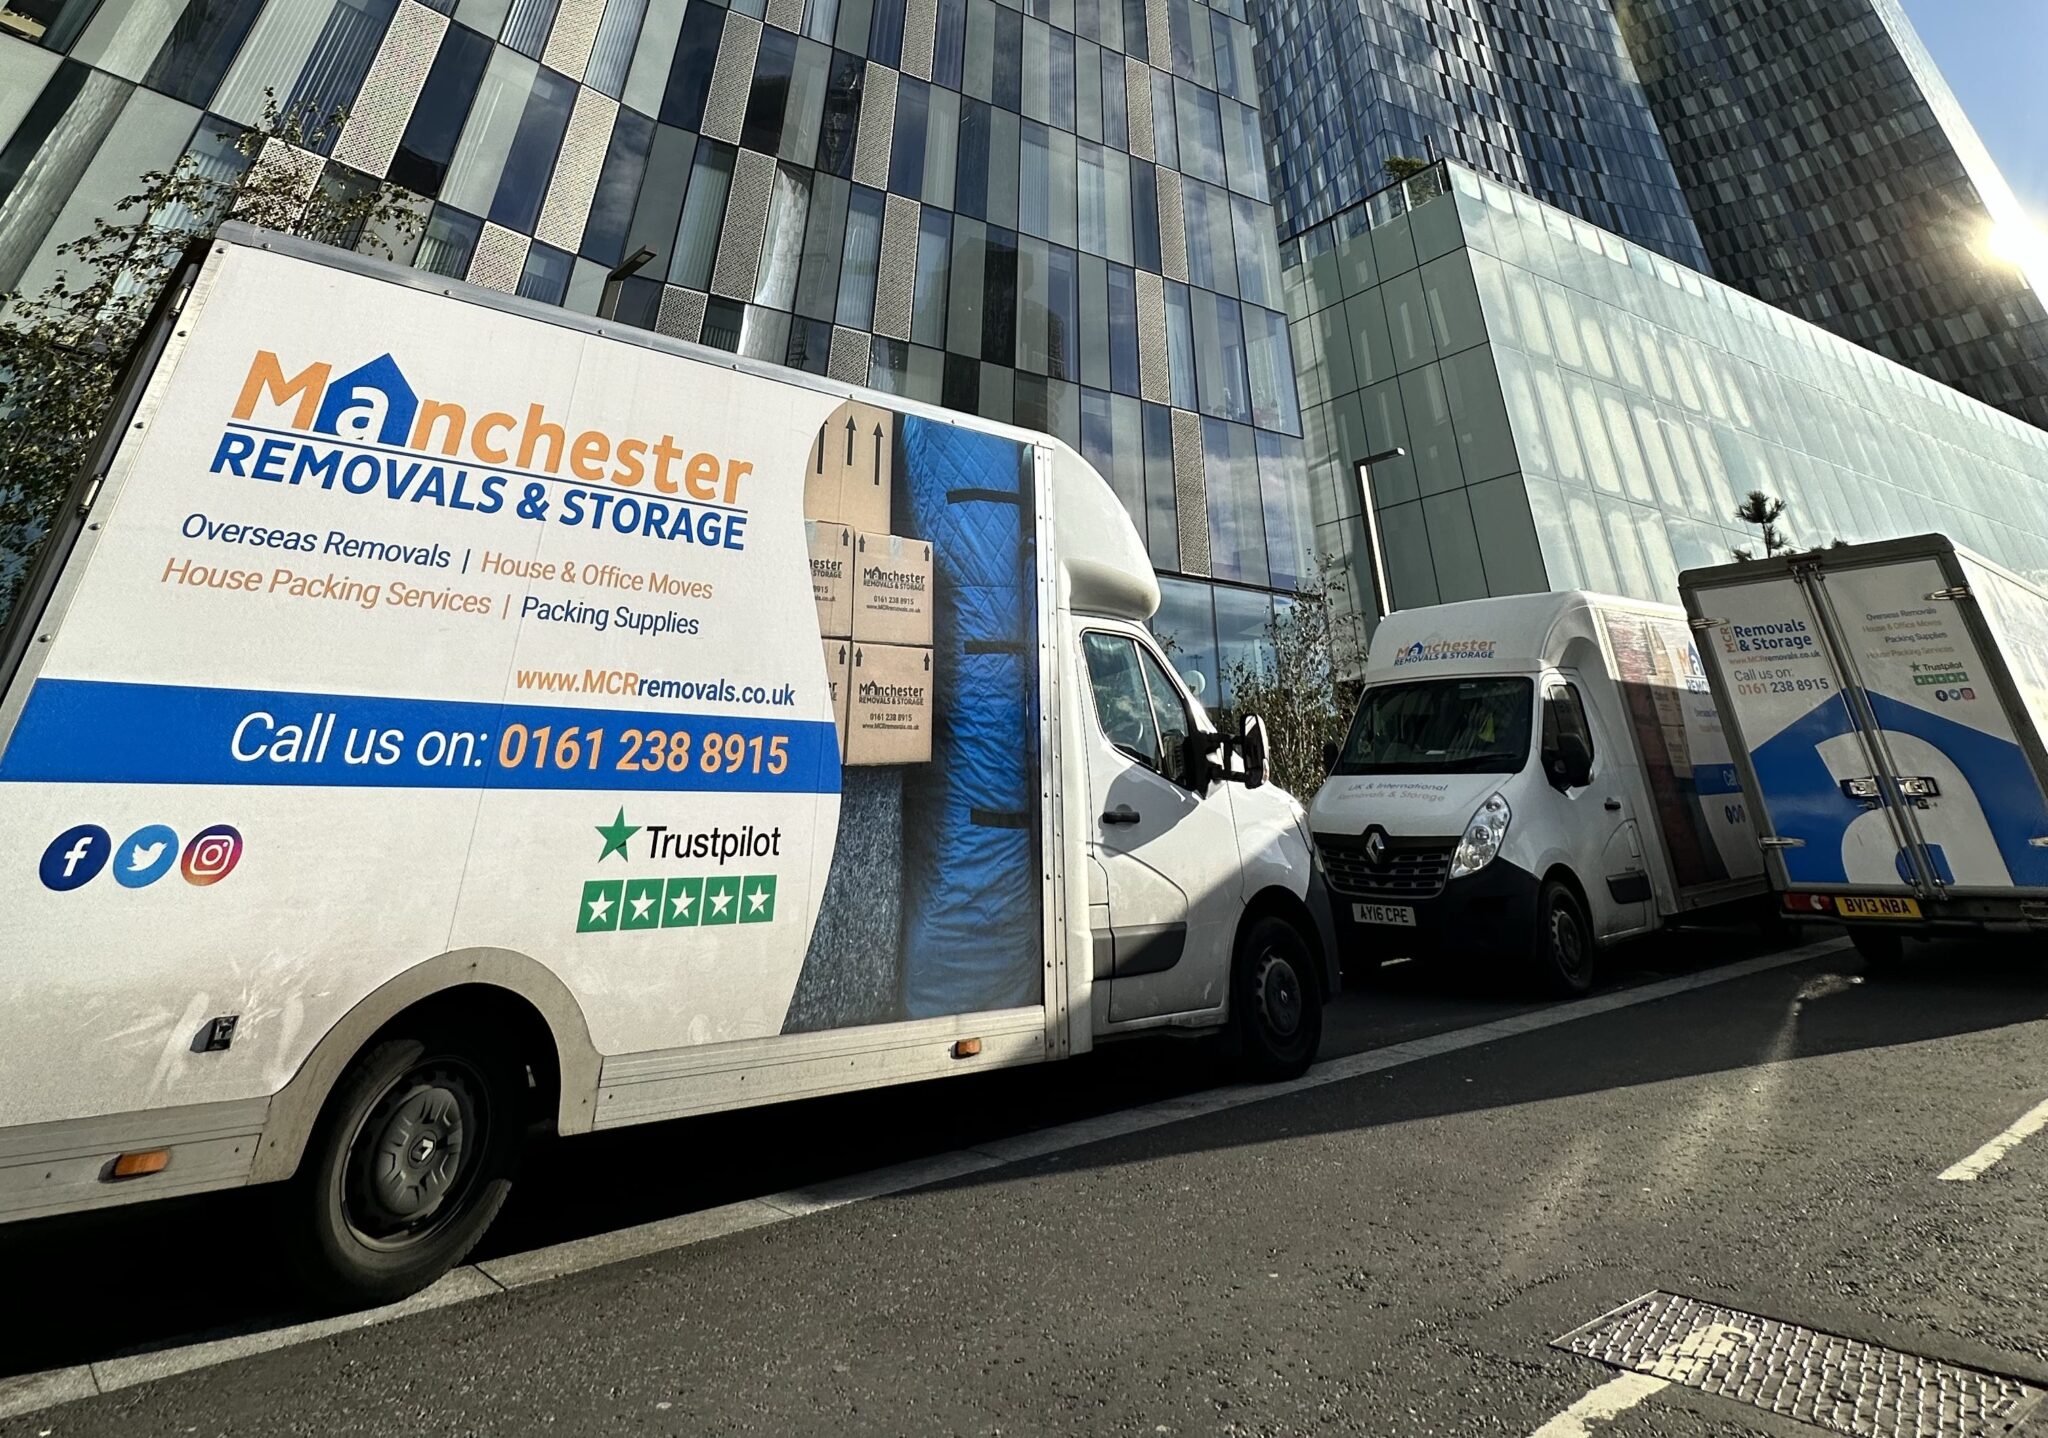 Removals Vans Parked Outside Deansgate Towers - Manchester Removals & Storage - Manchester Removals & Storage